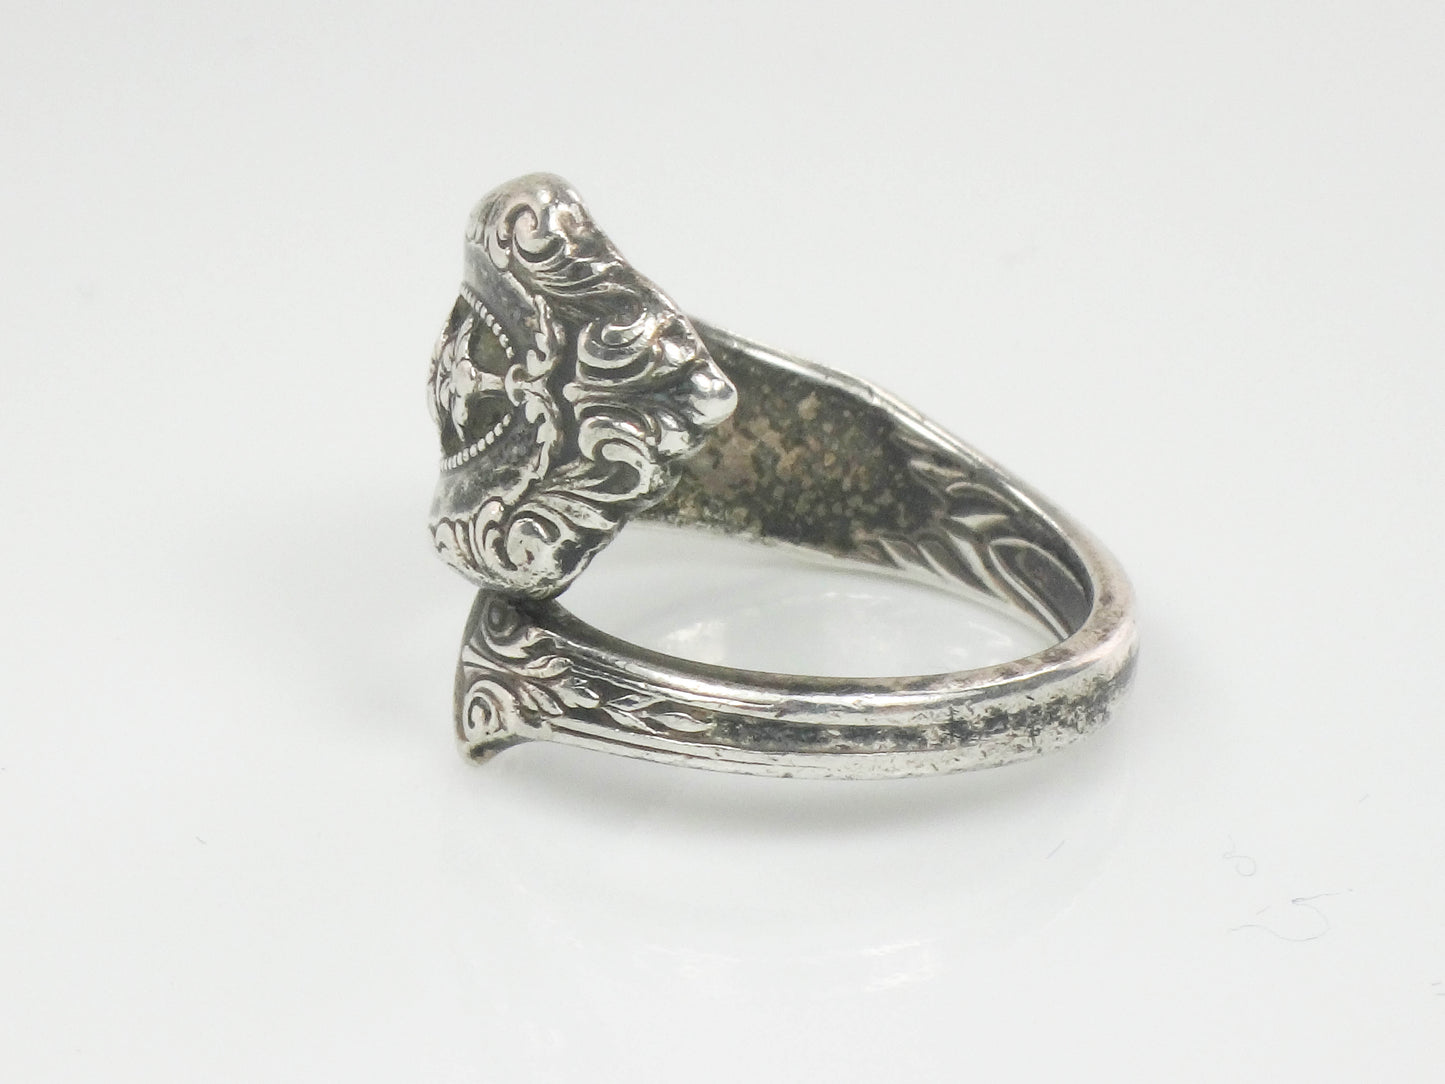 Vintage Wallace Rose Point Sterling Silver Spoon Ring with Floral Design